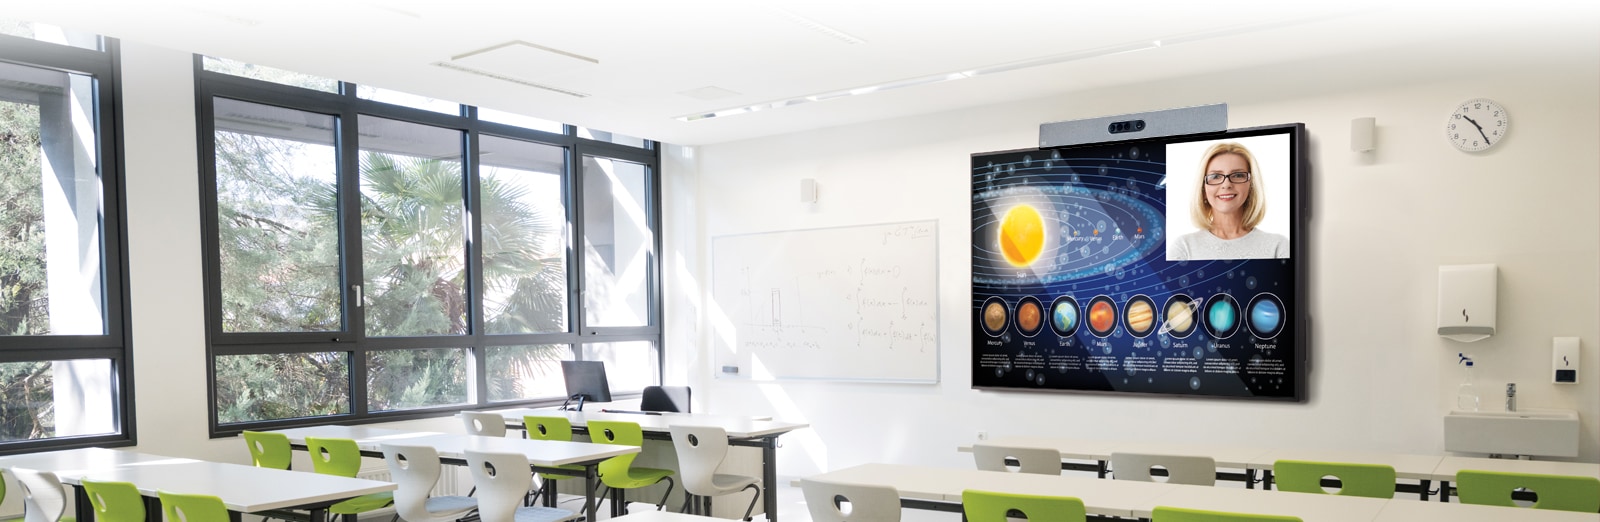 The Benefits of Cisco with LG Displays